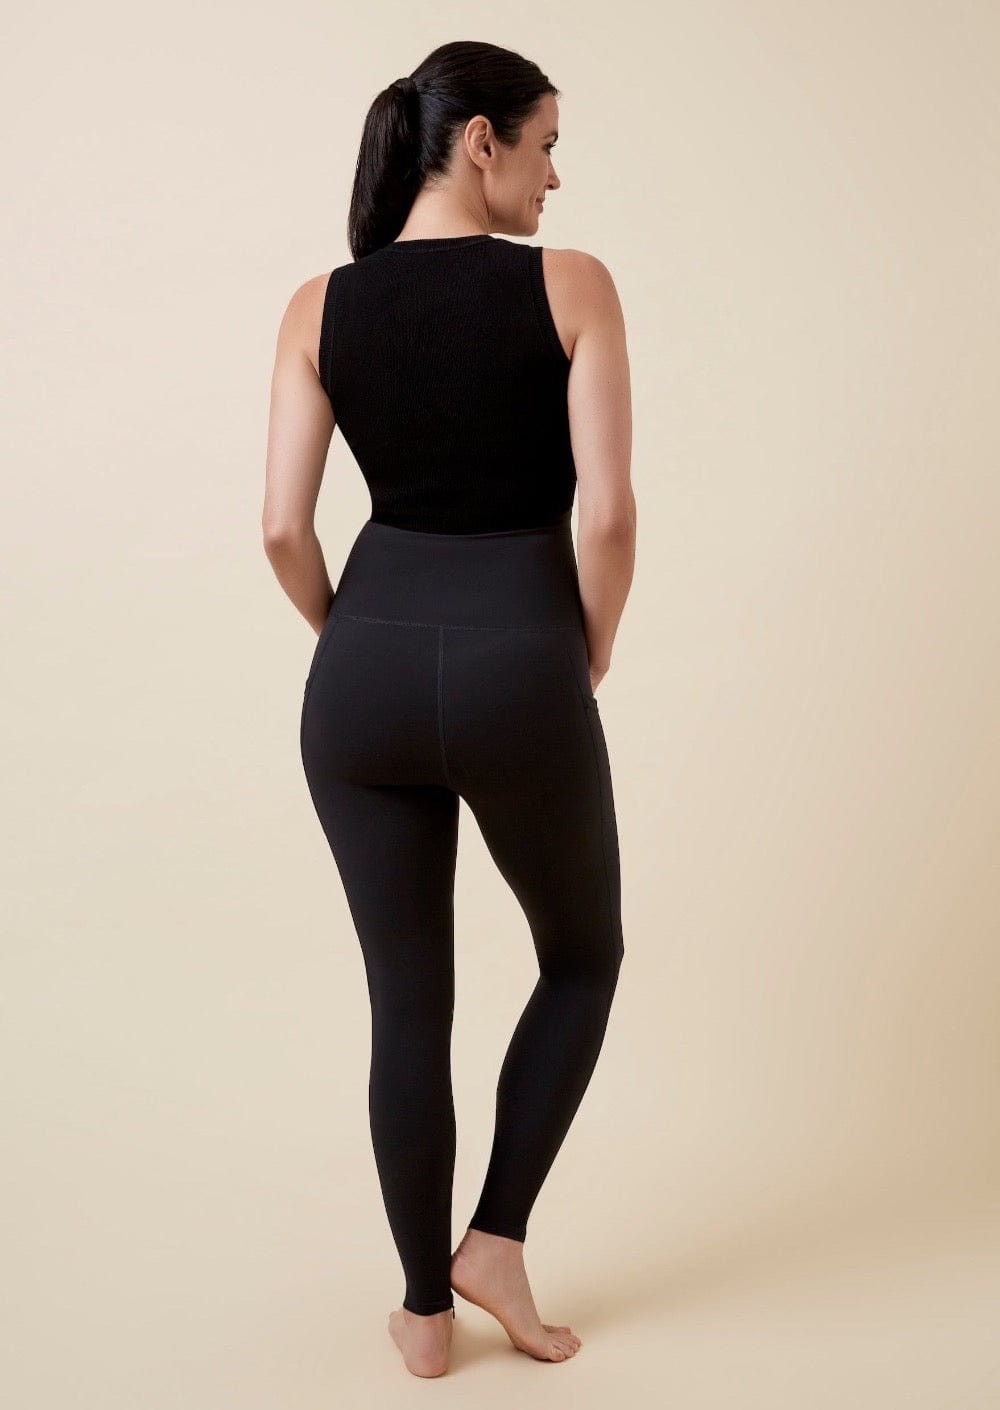 The Restorer postpartum Compression Support Legging back view- TheRY